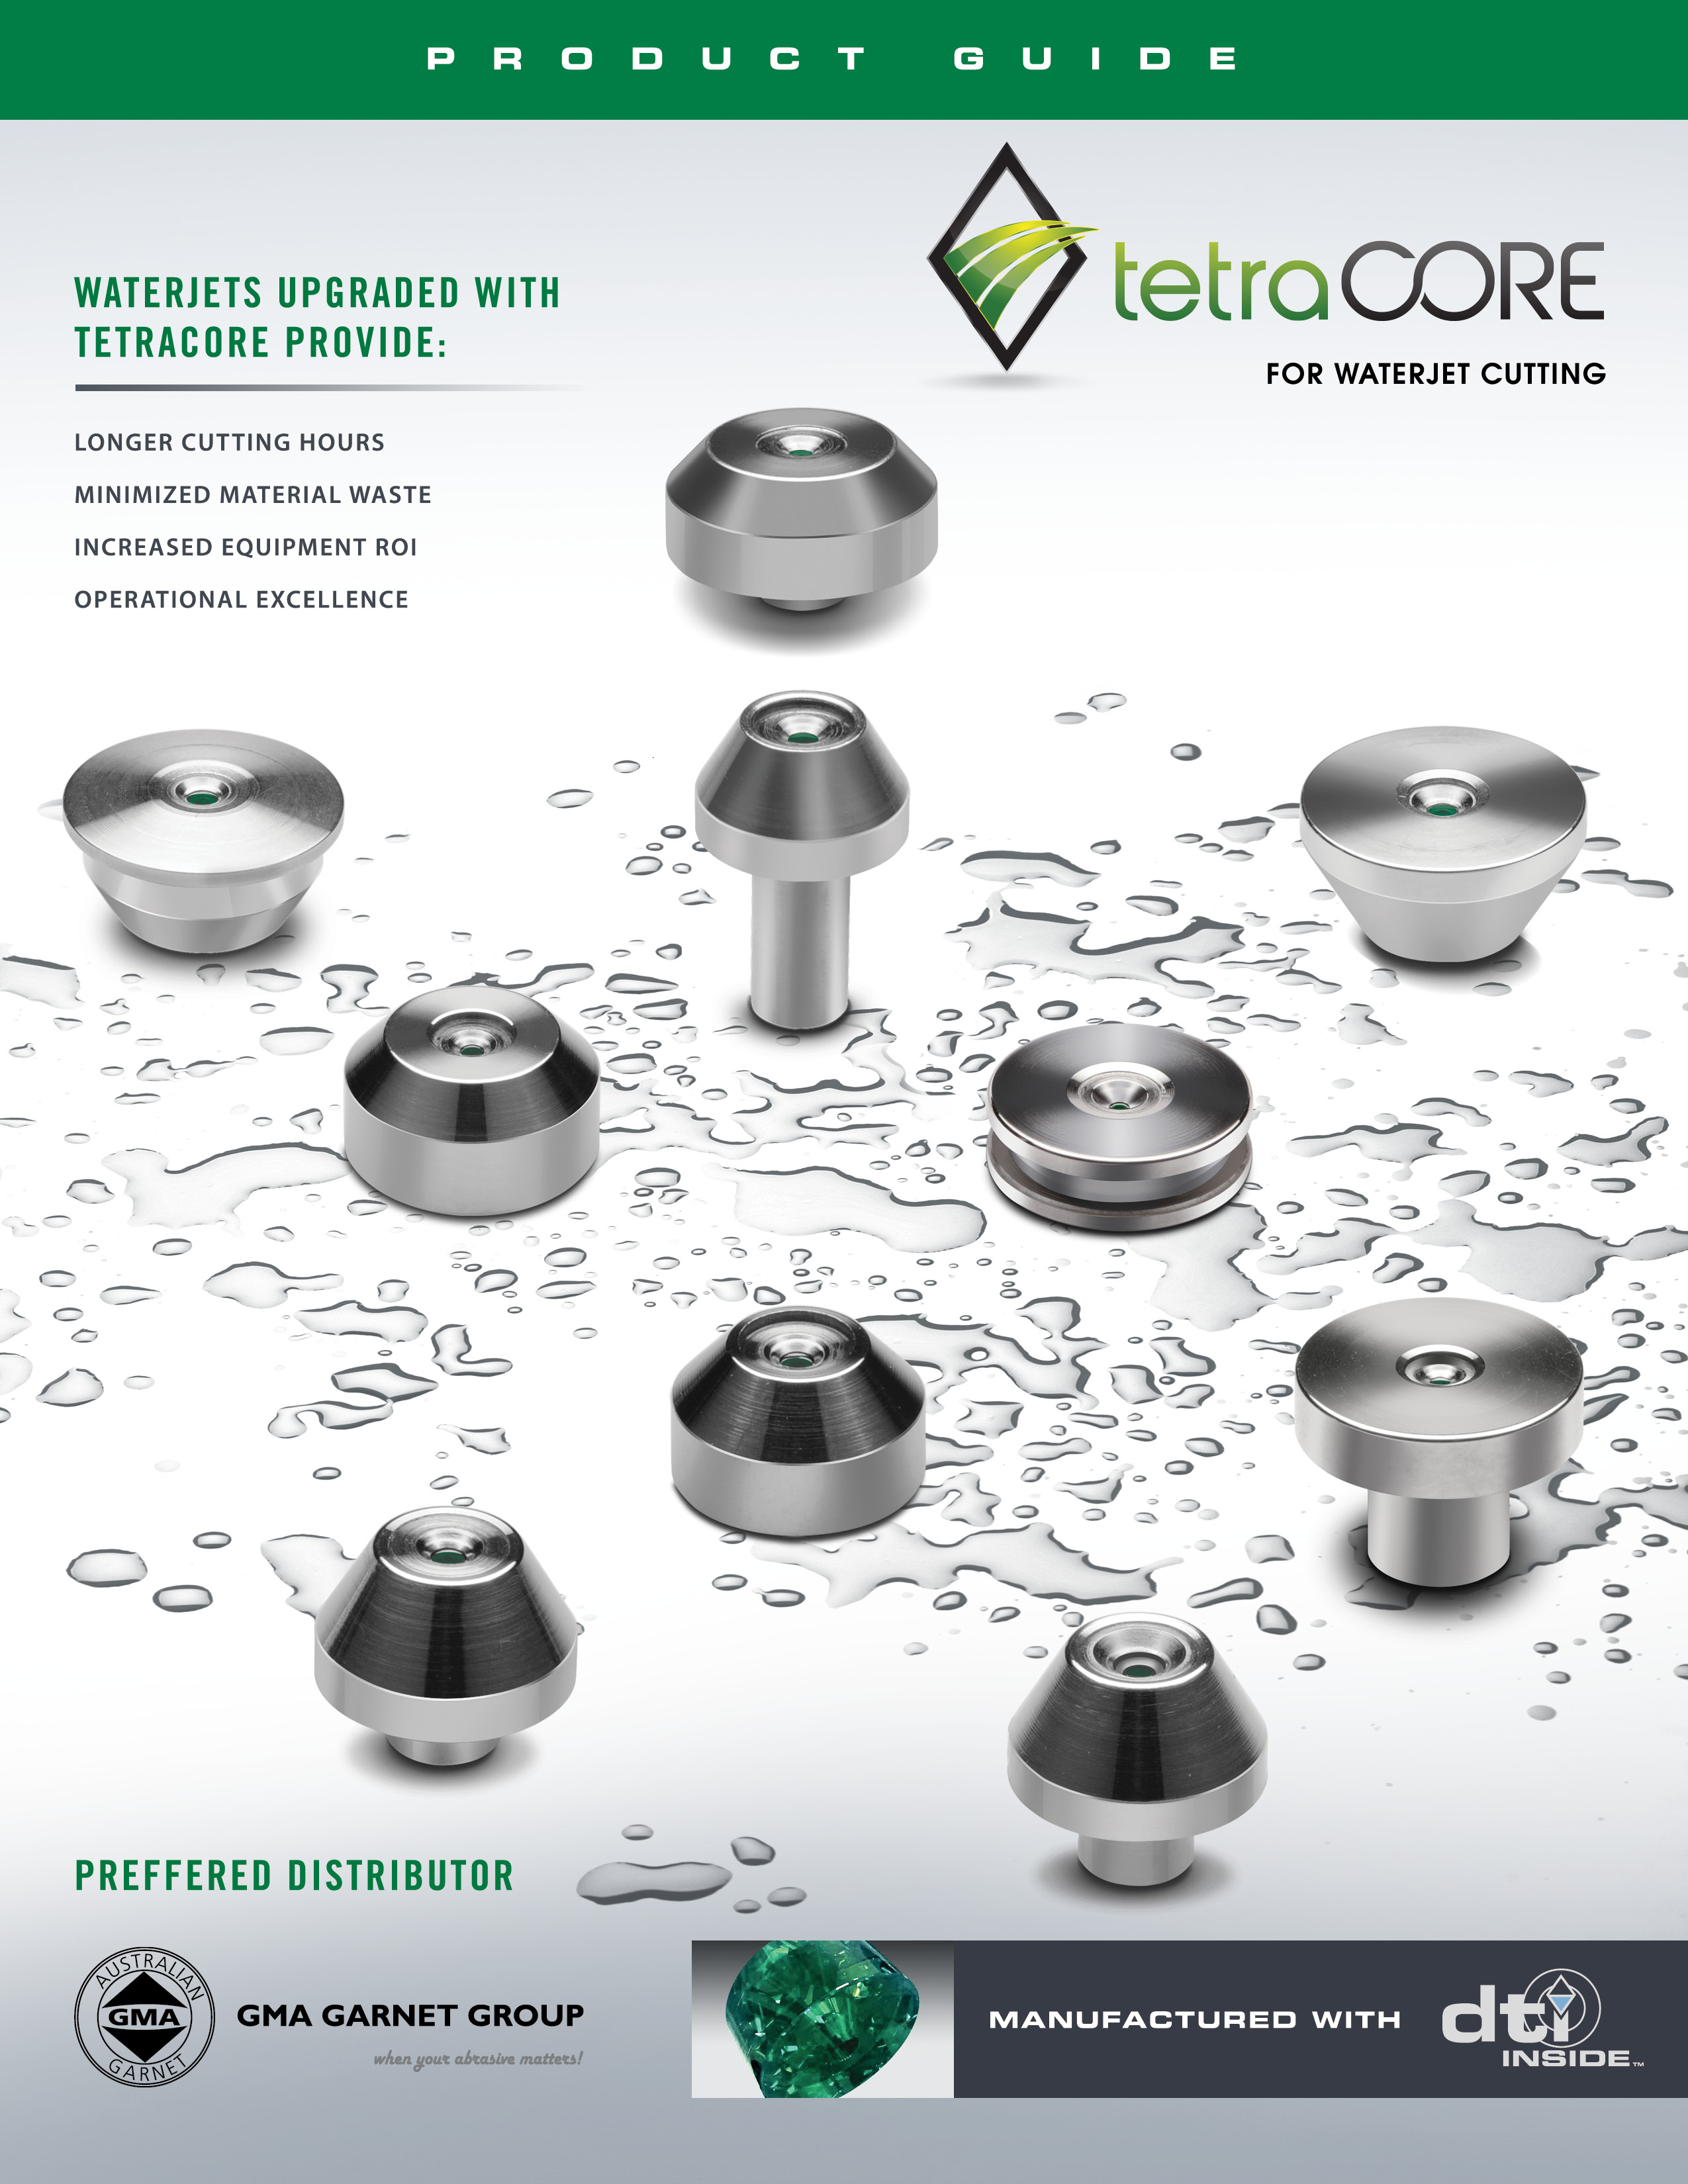 tetraCORE Product Guide PDF cover